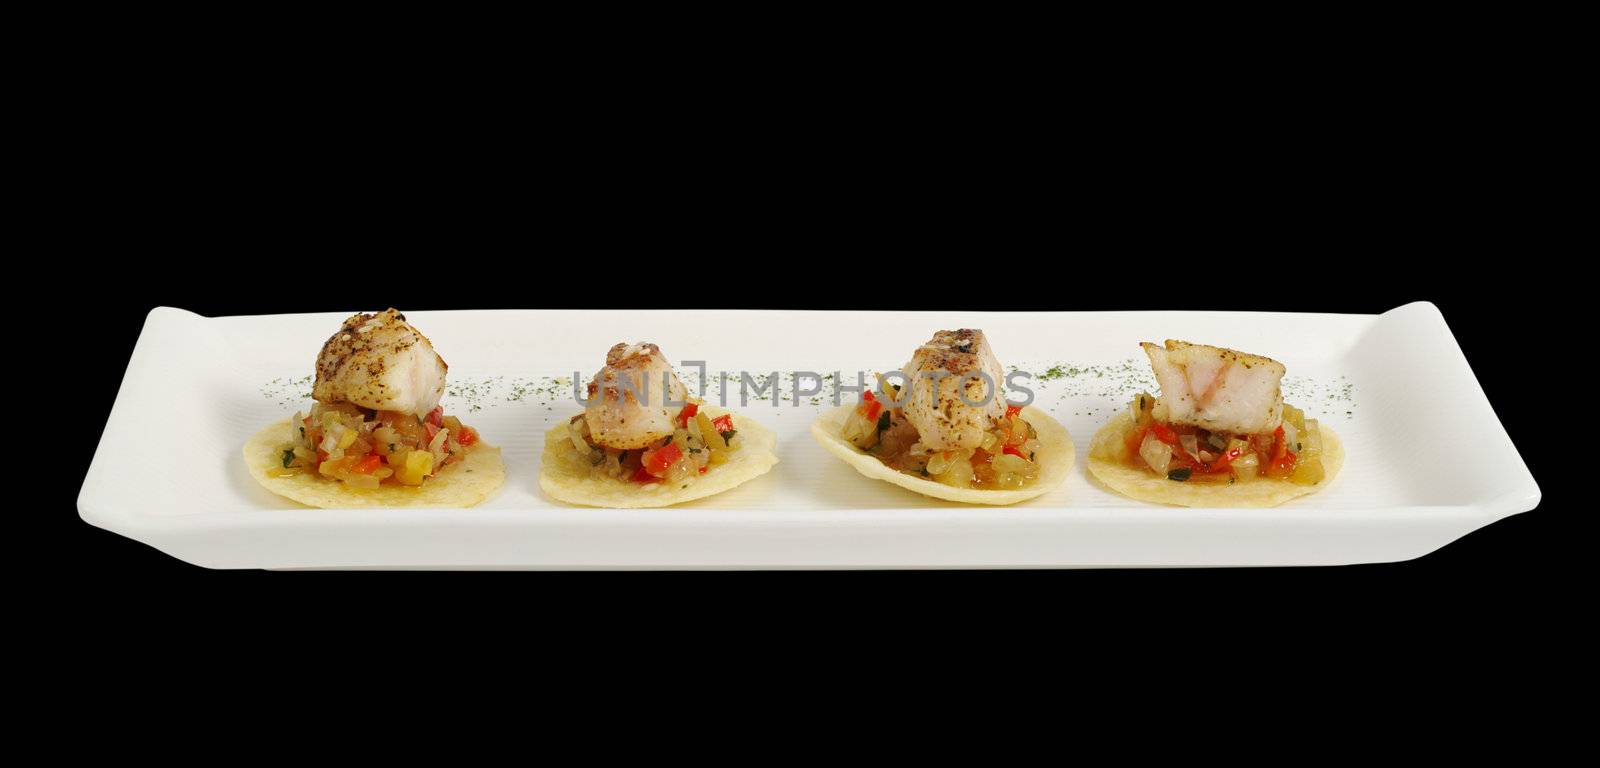 Appetizer: Pieces of tuna fish on vegetables and chips on rectangular white plate on black background (Isolated)